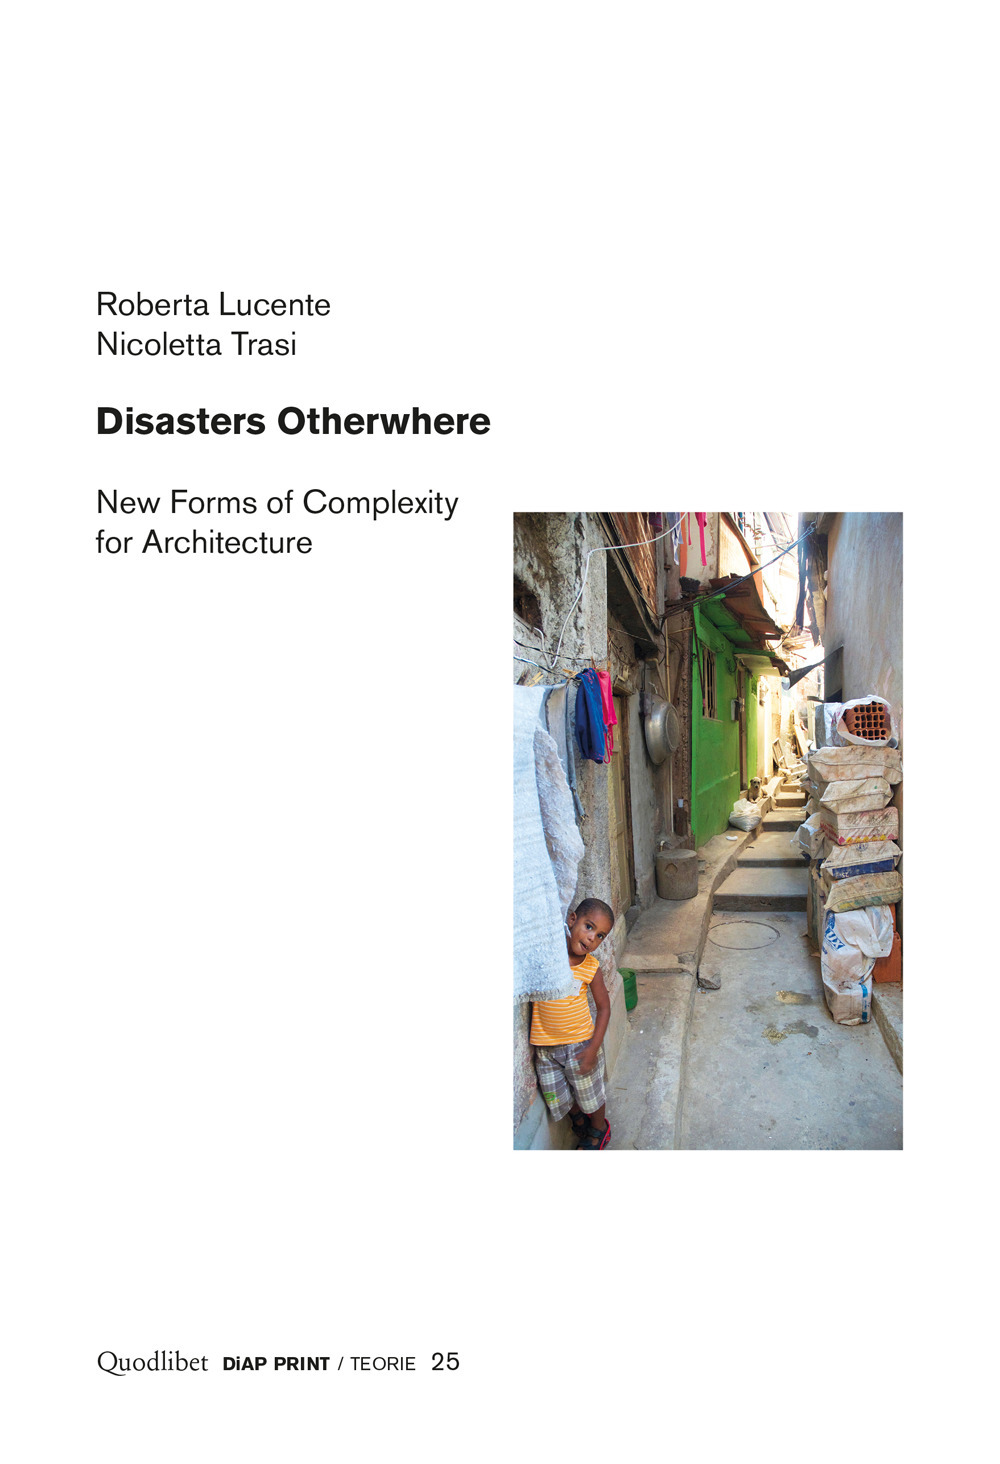 DISASTERS OTHERWHERE. NEW FORMS OF COMPLEXITY TO ARCHITECTURE - Lucente Roberta; Trasi Nicoletta - 9788822905130